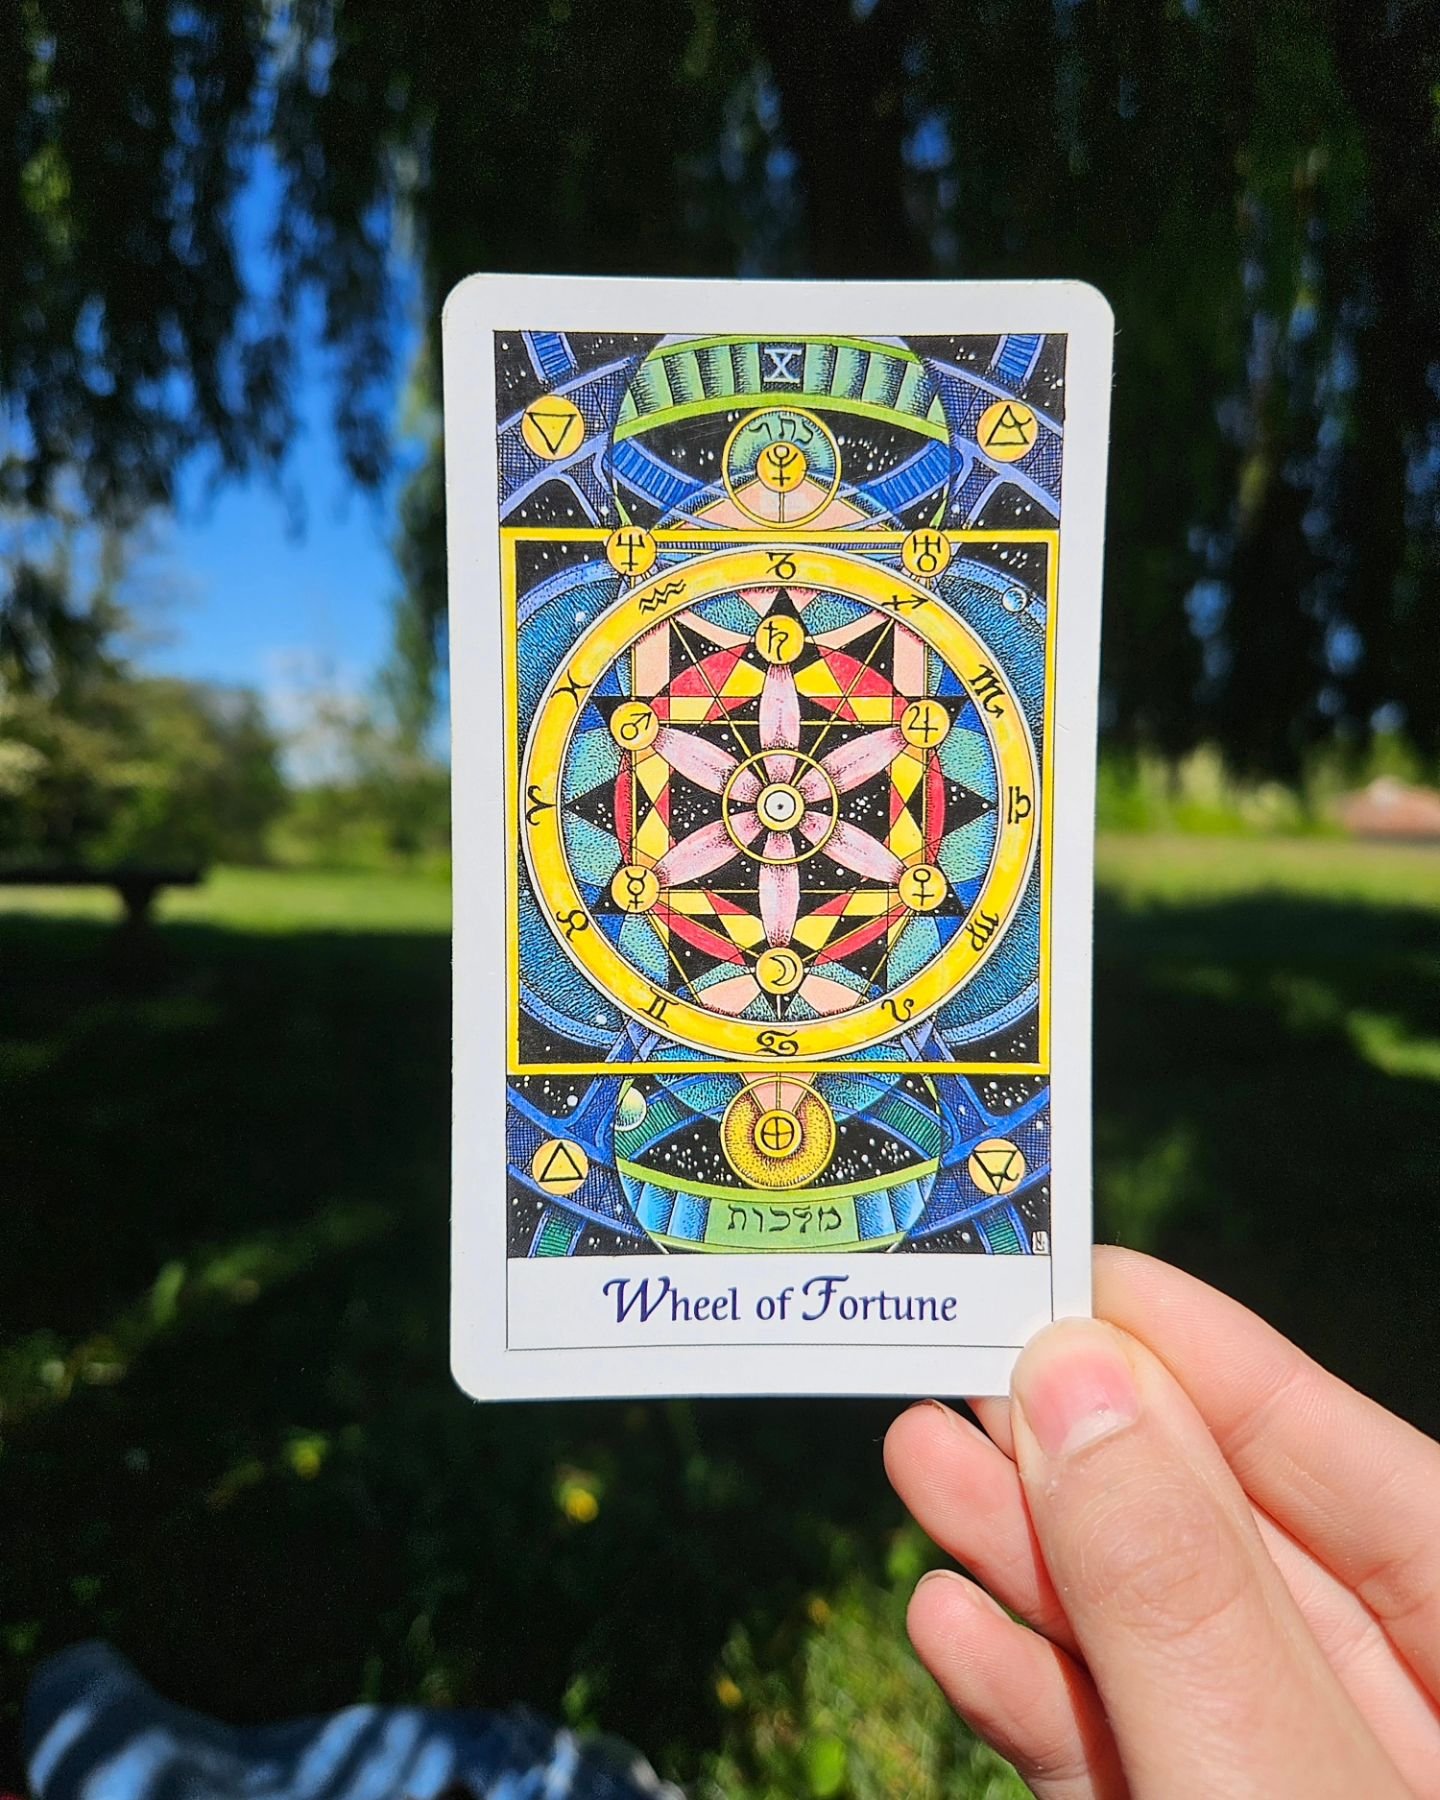 💫🌠 Cosmic Tarot 🌠💫

This 78 card Tarot deck is matched with energy from the universe in each and every design. Comes with an instruction booklet.

Author : Norbert Losche
Published : 1993
Price : &pound;23